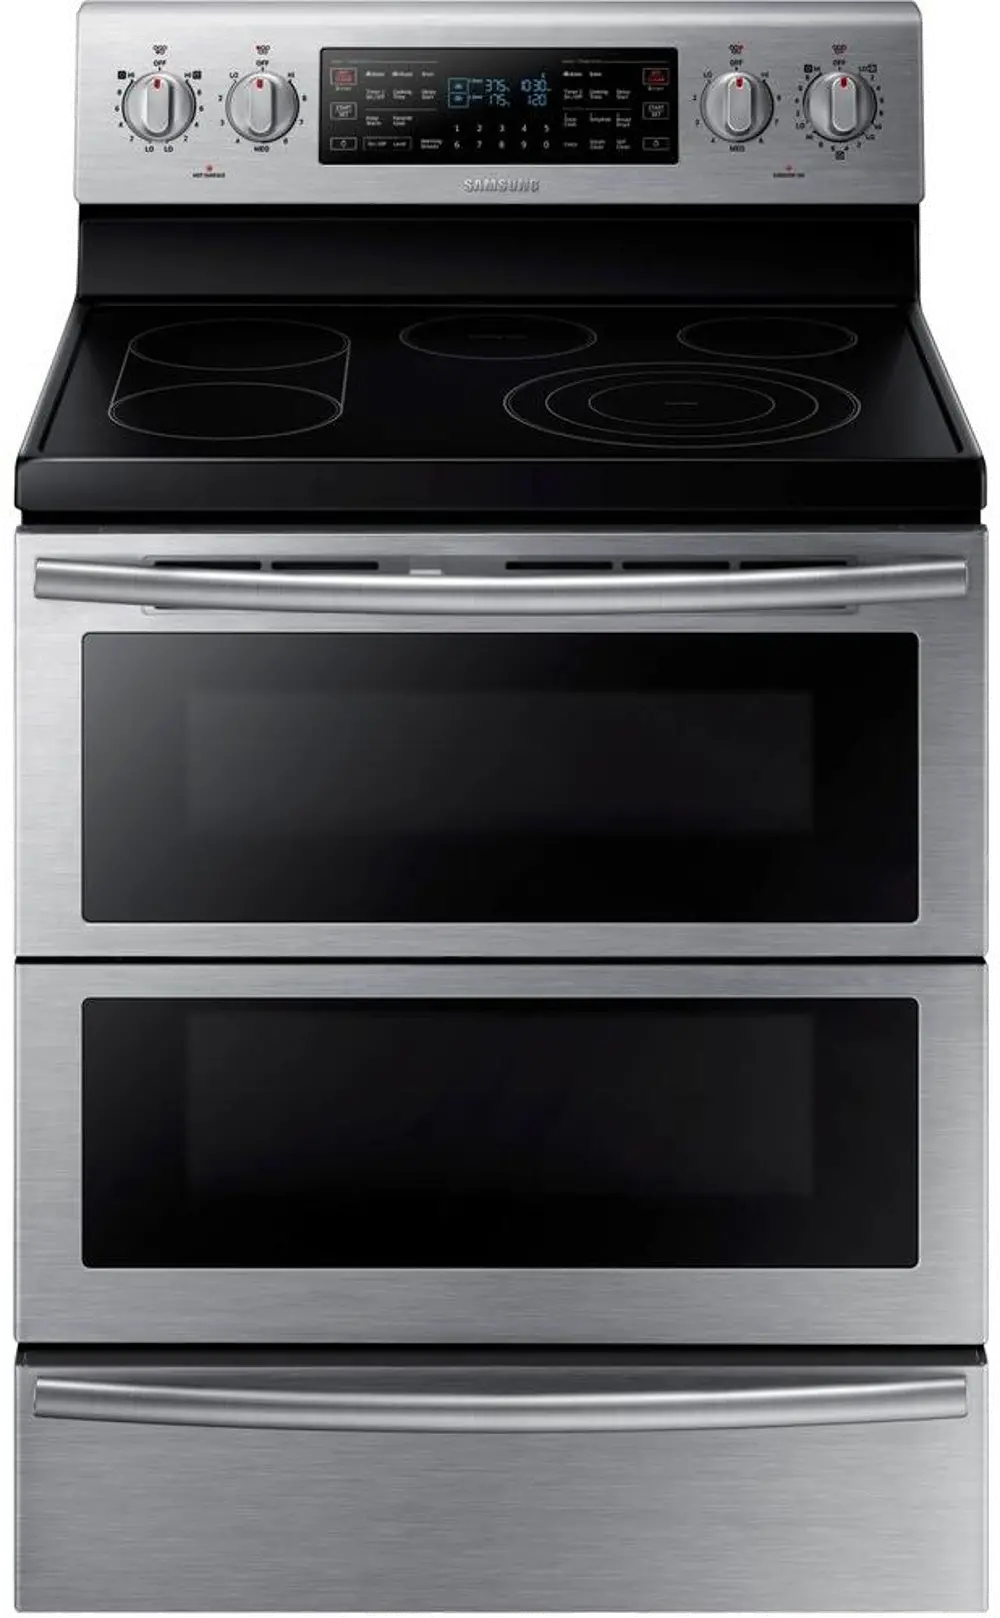 NE59J7850WS Samsung Double Oven Electric Range with Flex Duo - 5.9 cu. ft. Stainless Steel-1